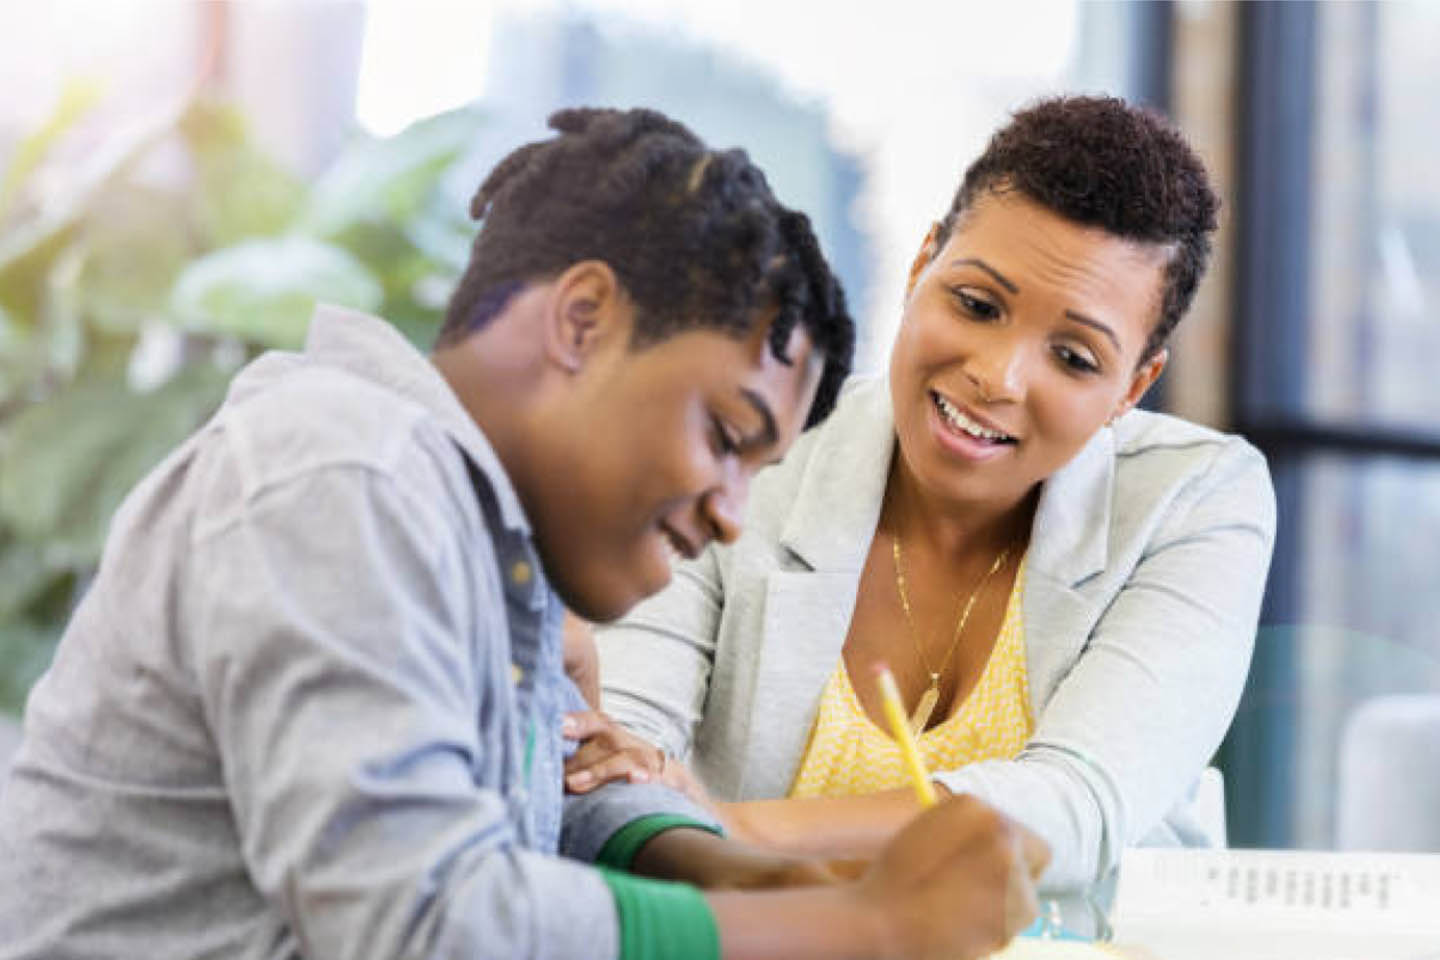 Black female teacher helping a Black middle school student with his school curriculum work.